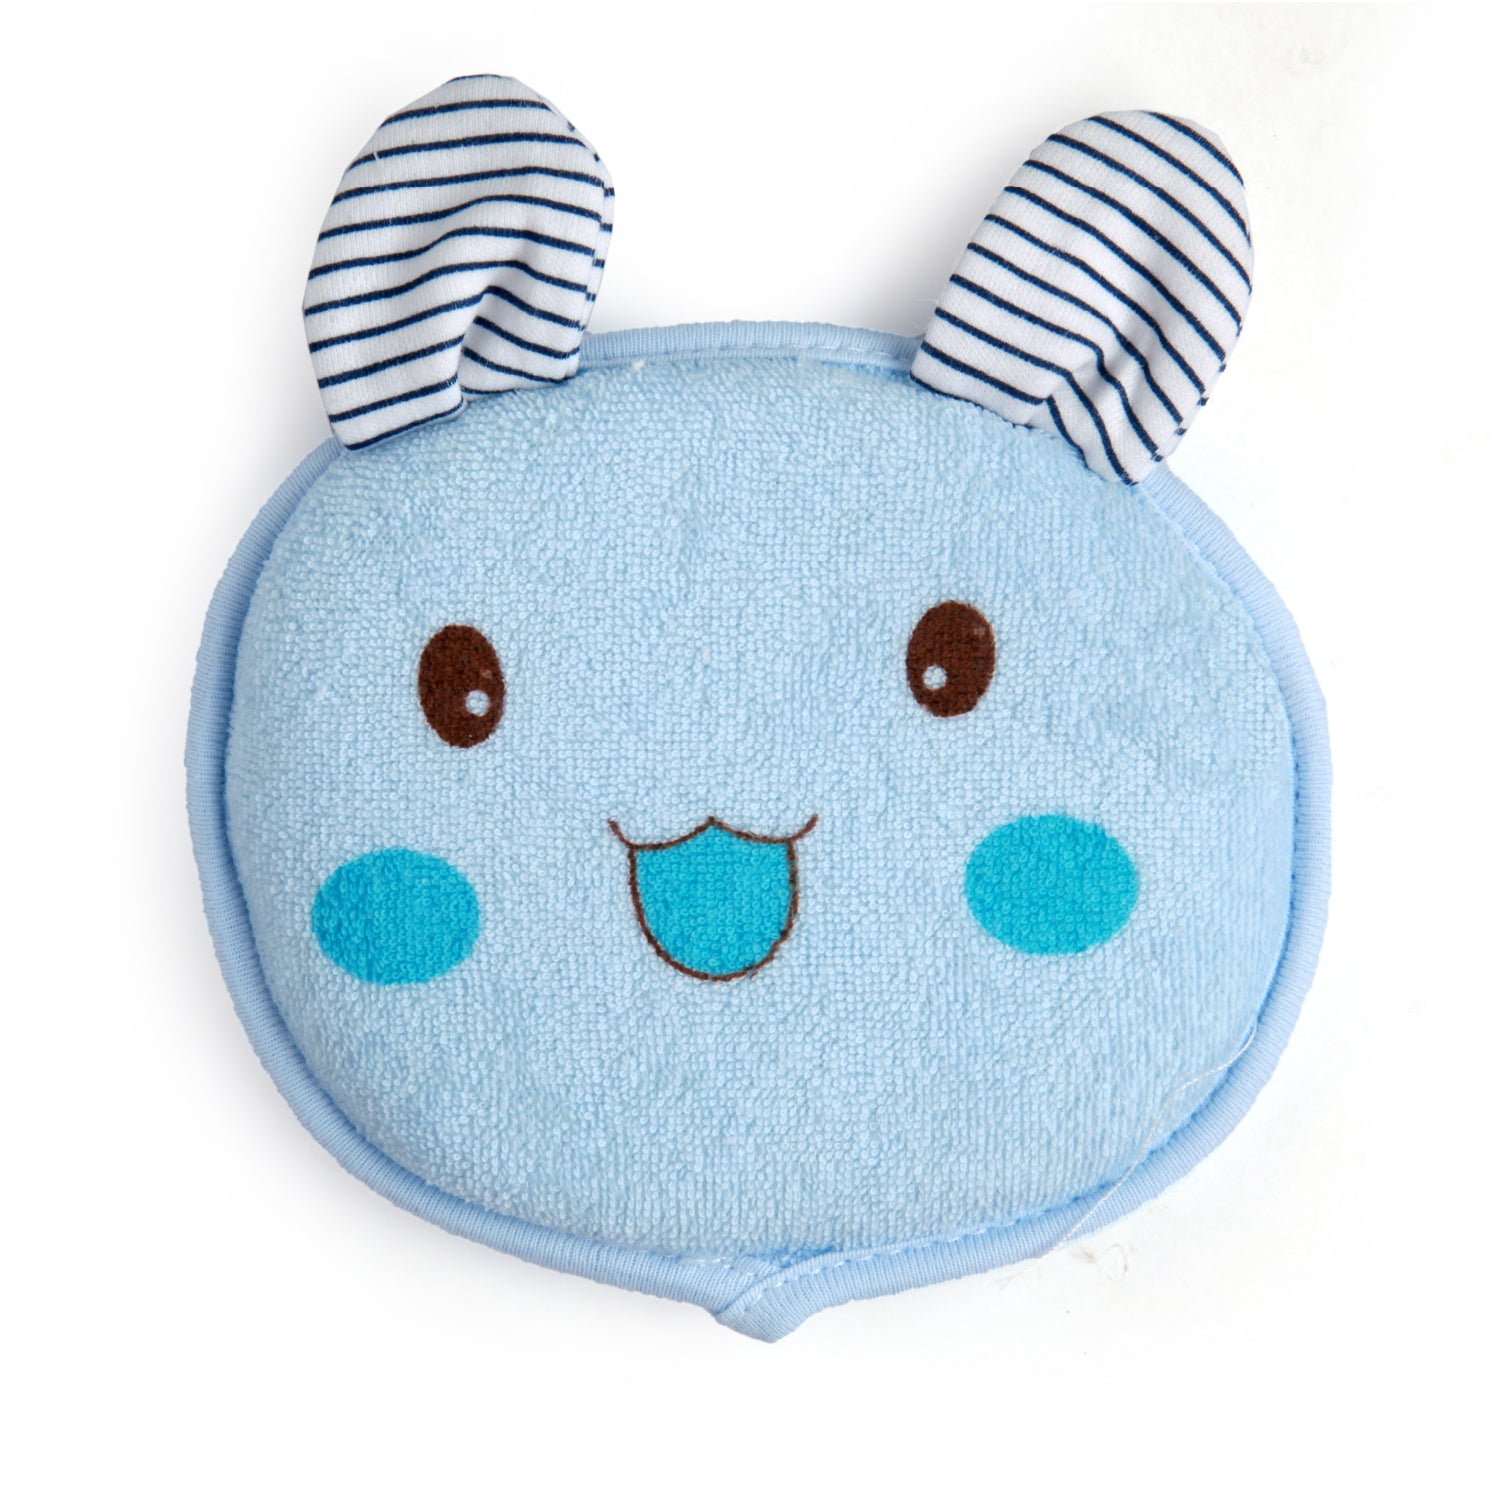 Smart Bunny Red And Blue 2 Pk Bath Sponge Pad With Handle - Baby Moo